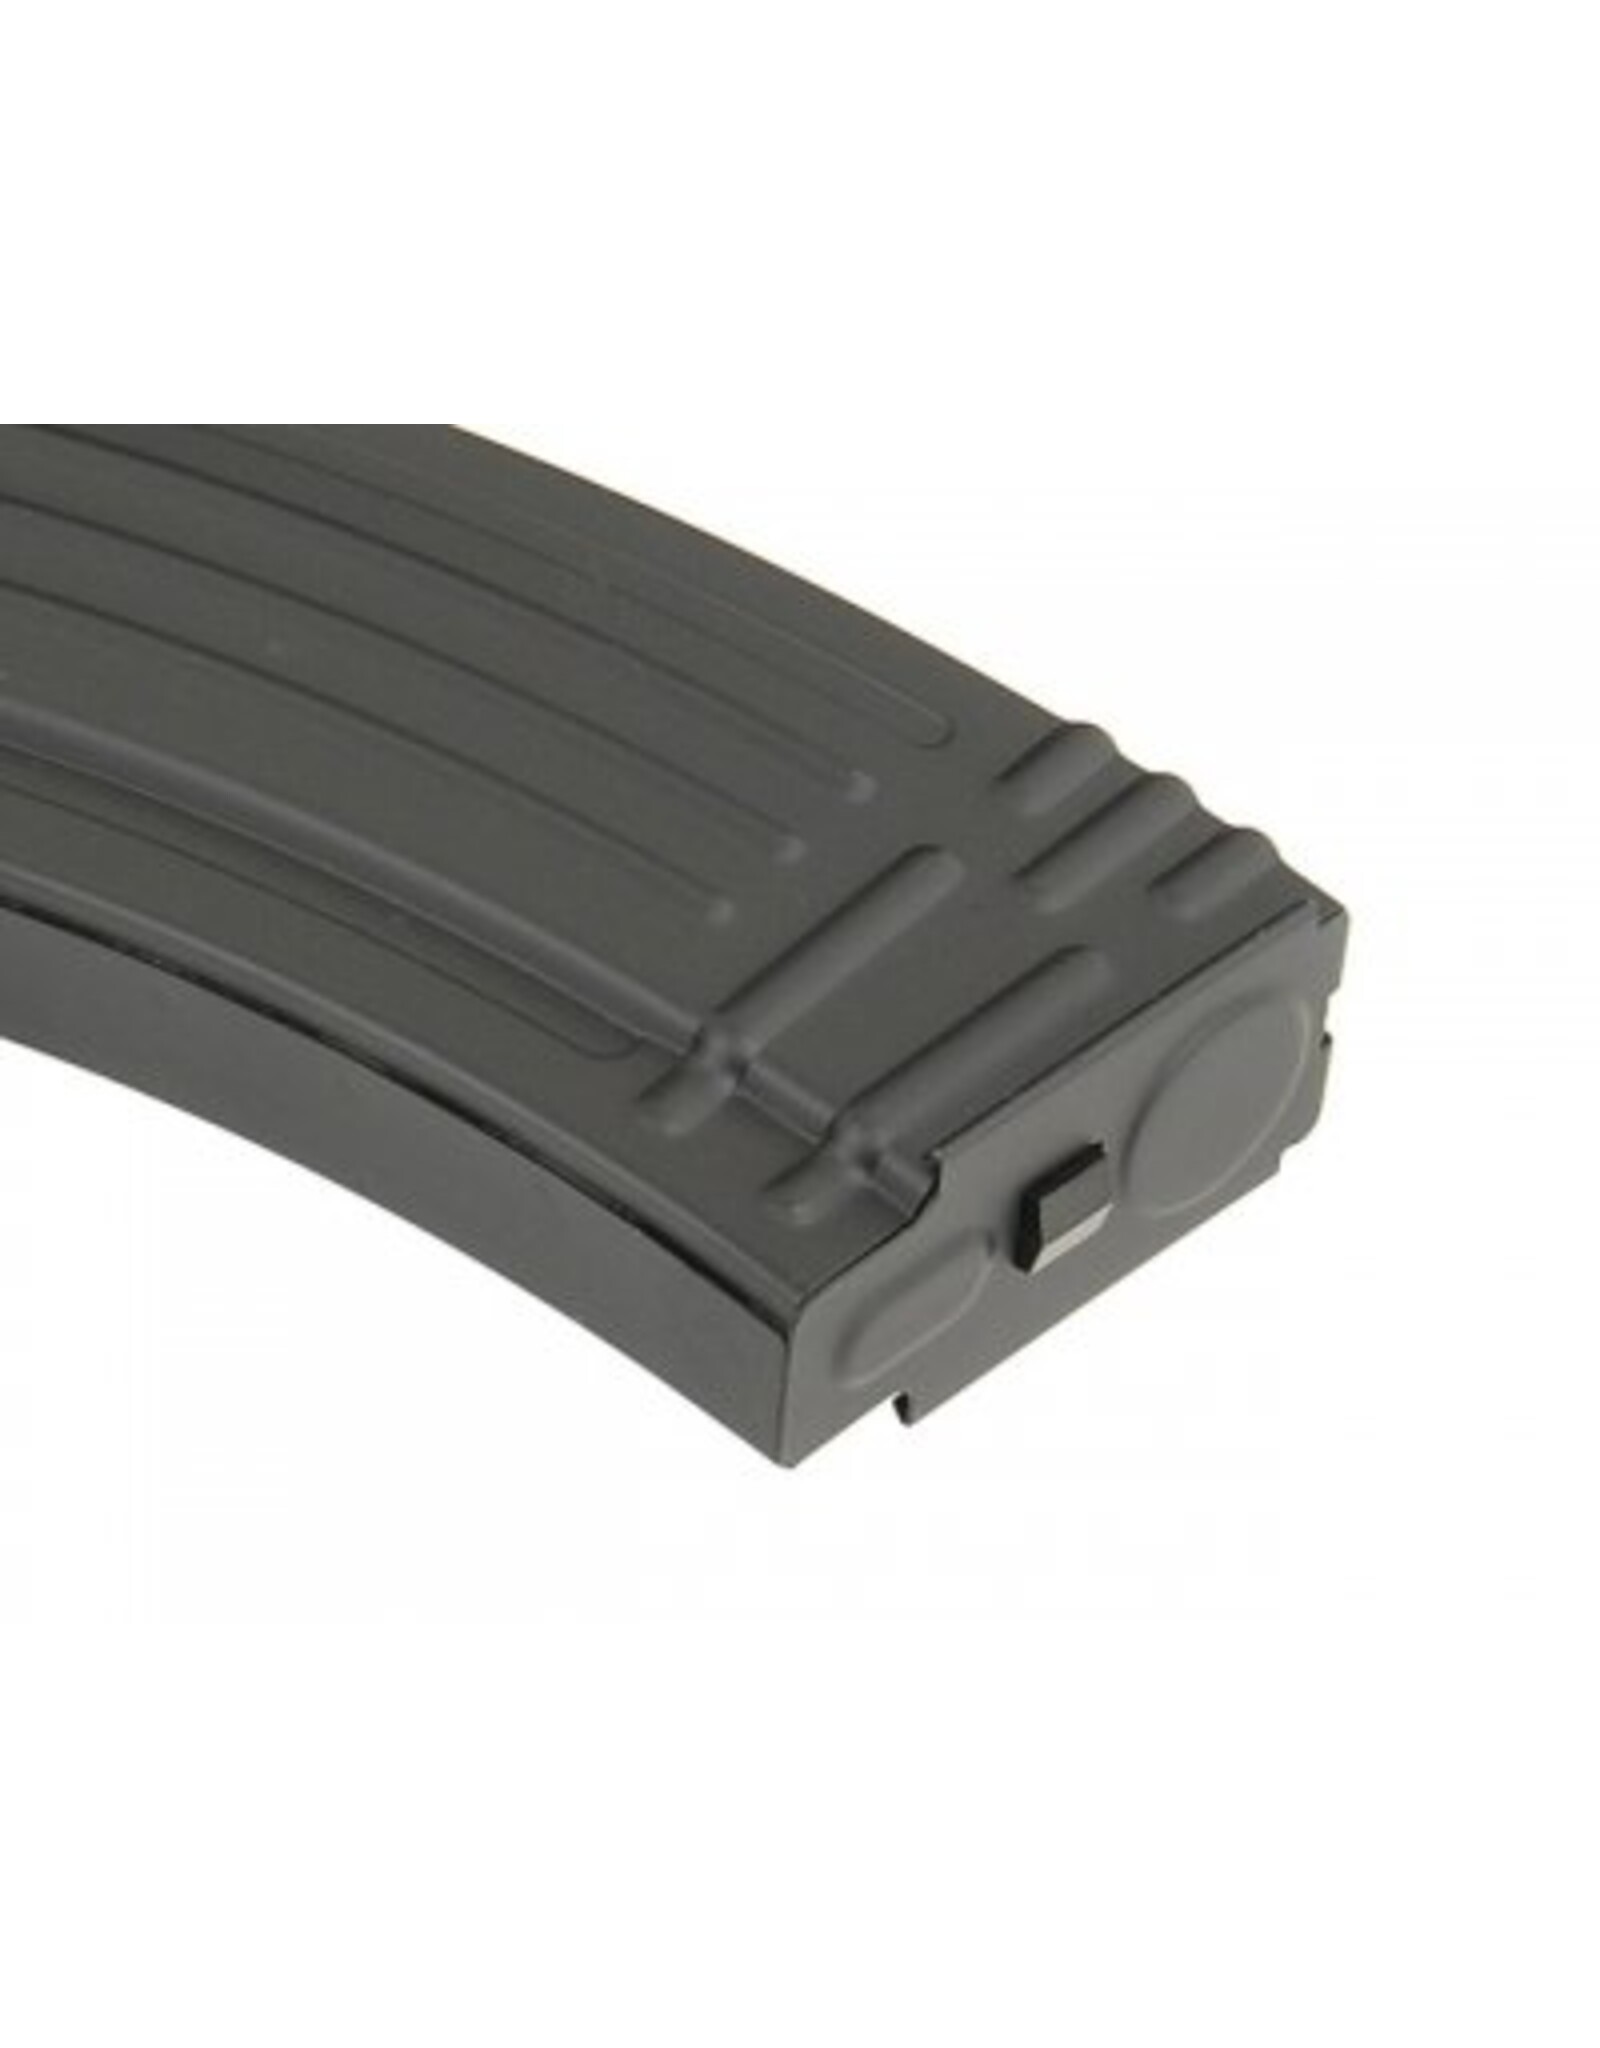 Mid cap for AK74 - 200 RD